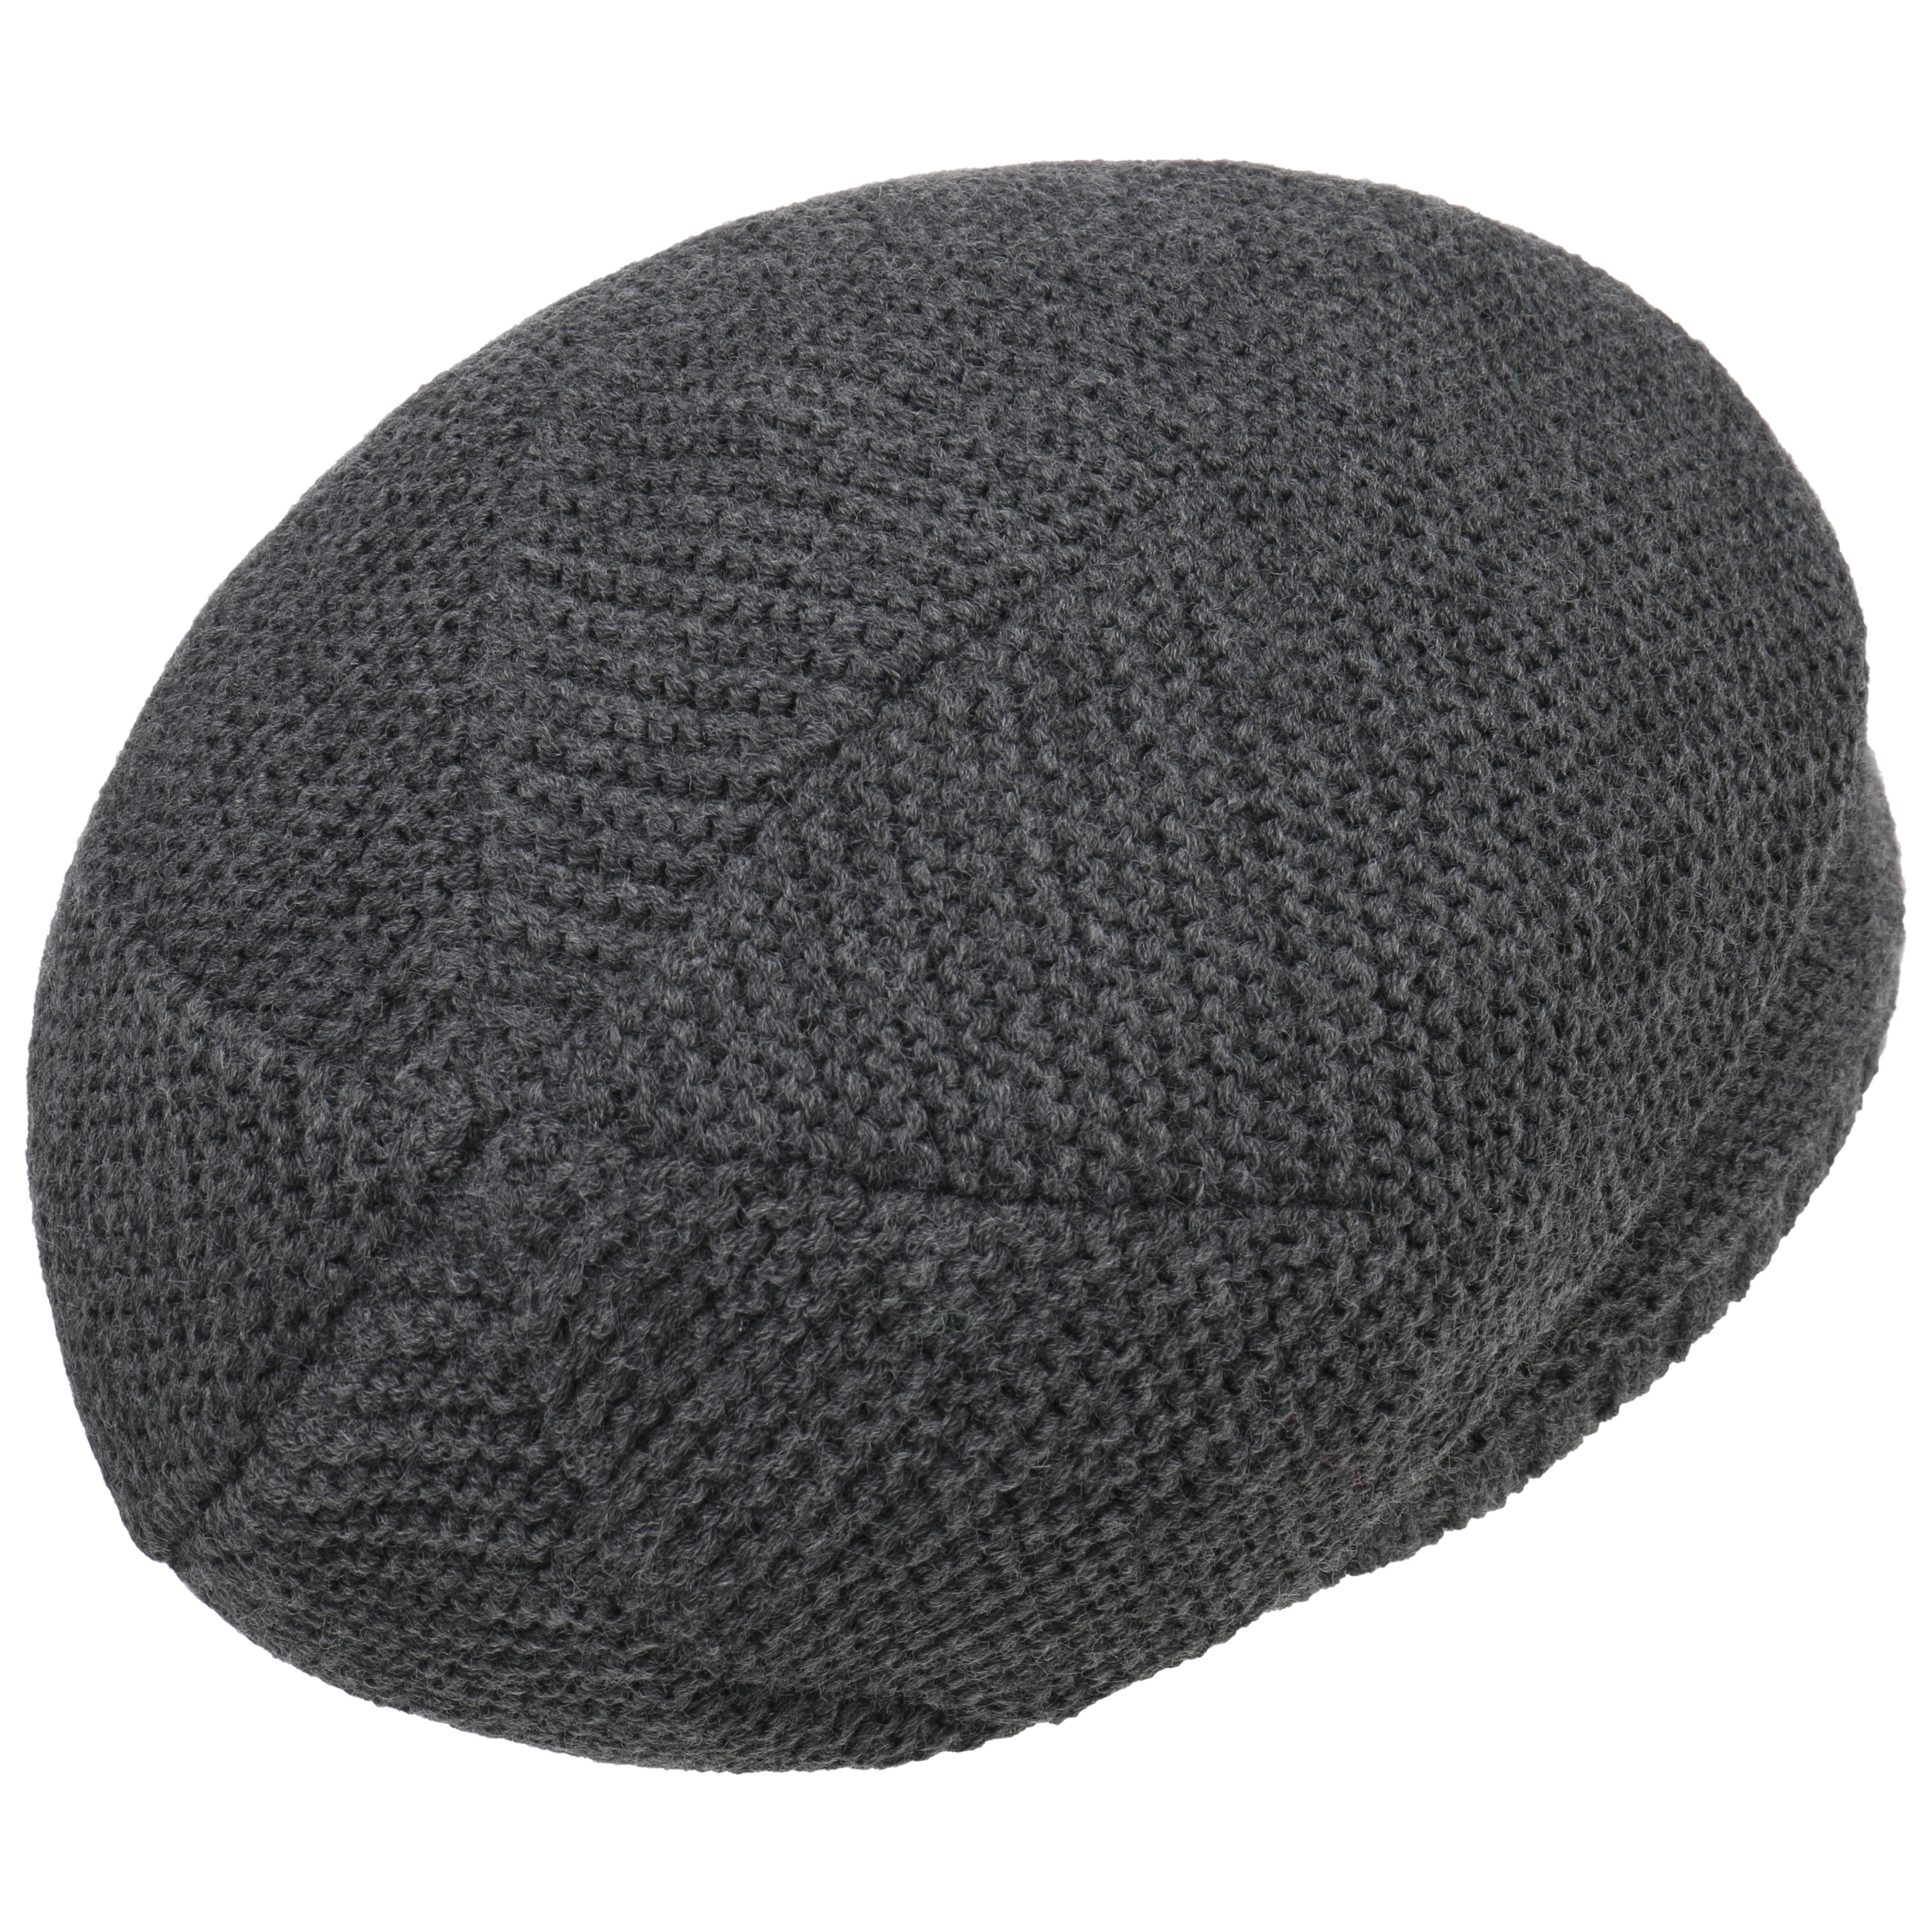 € 37,95 Hat Chillouts - Keith by Beanie